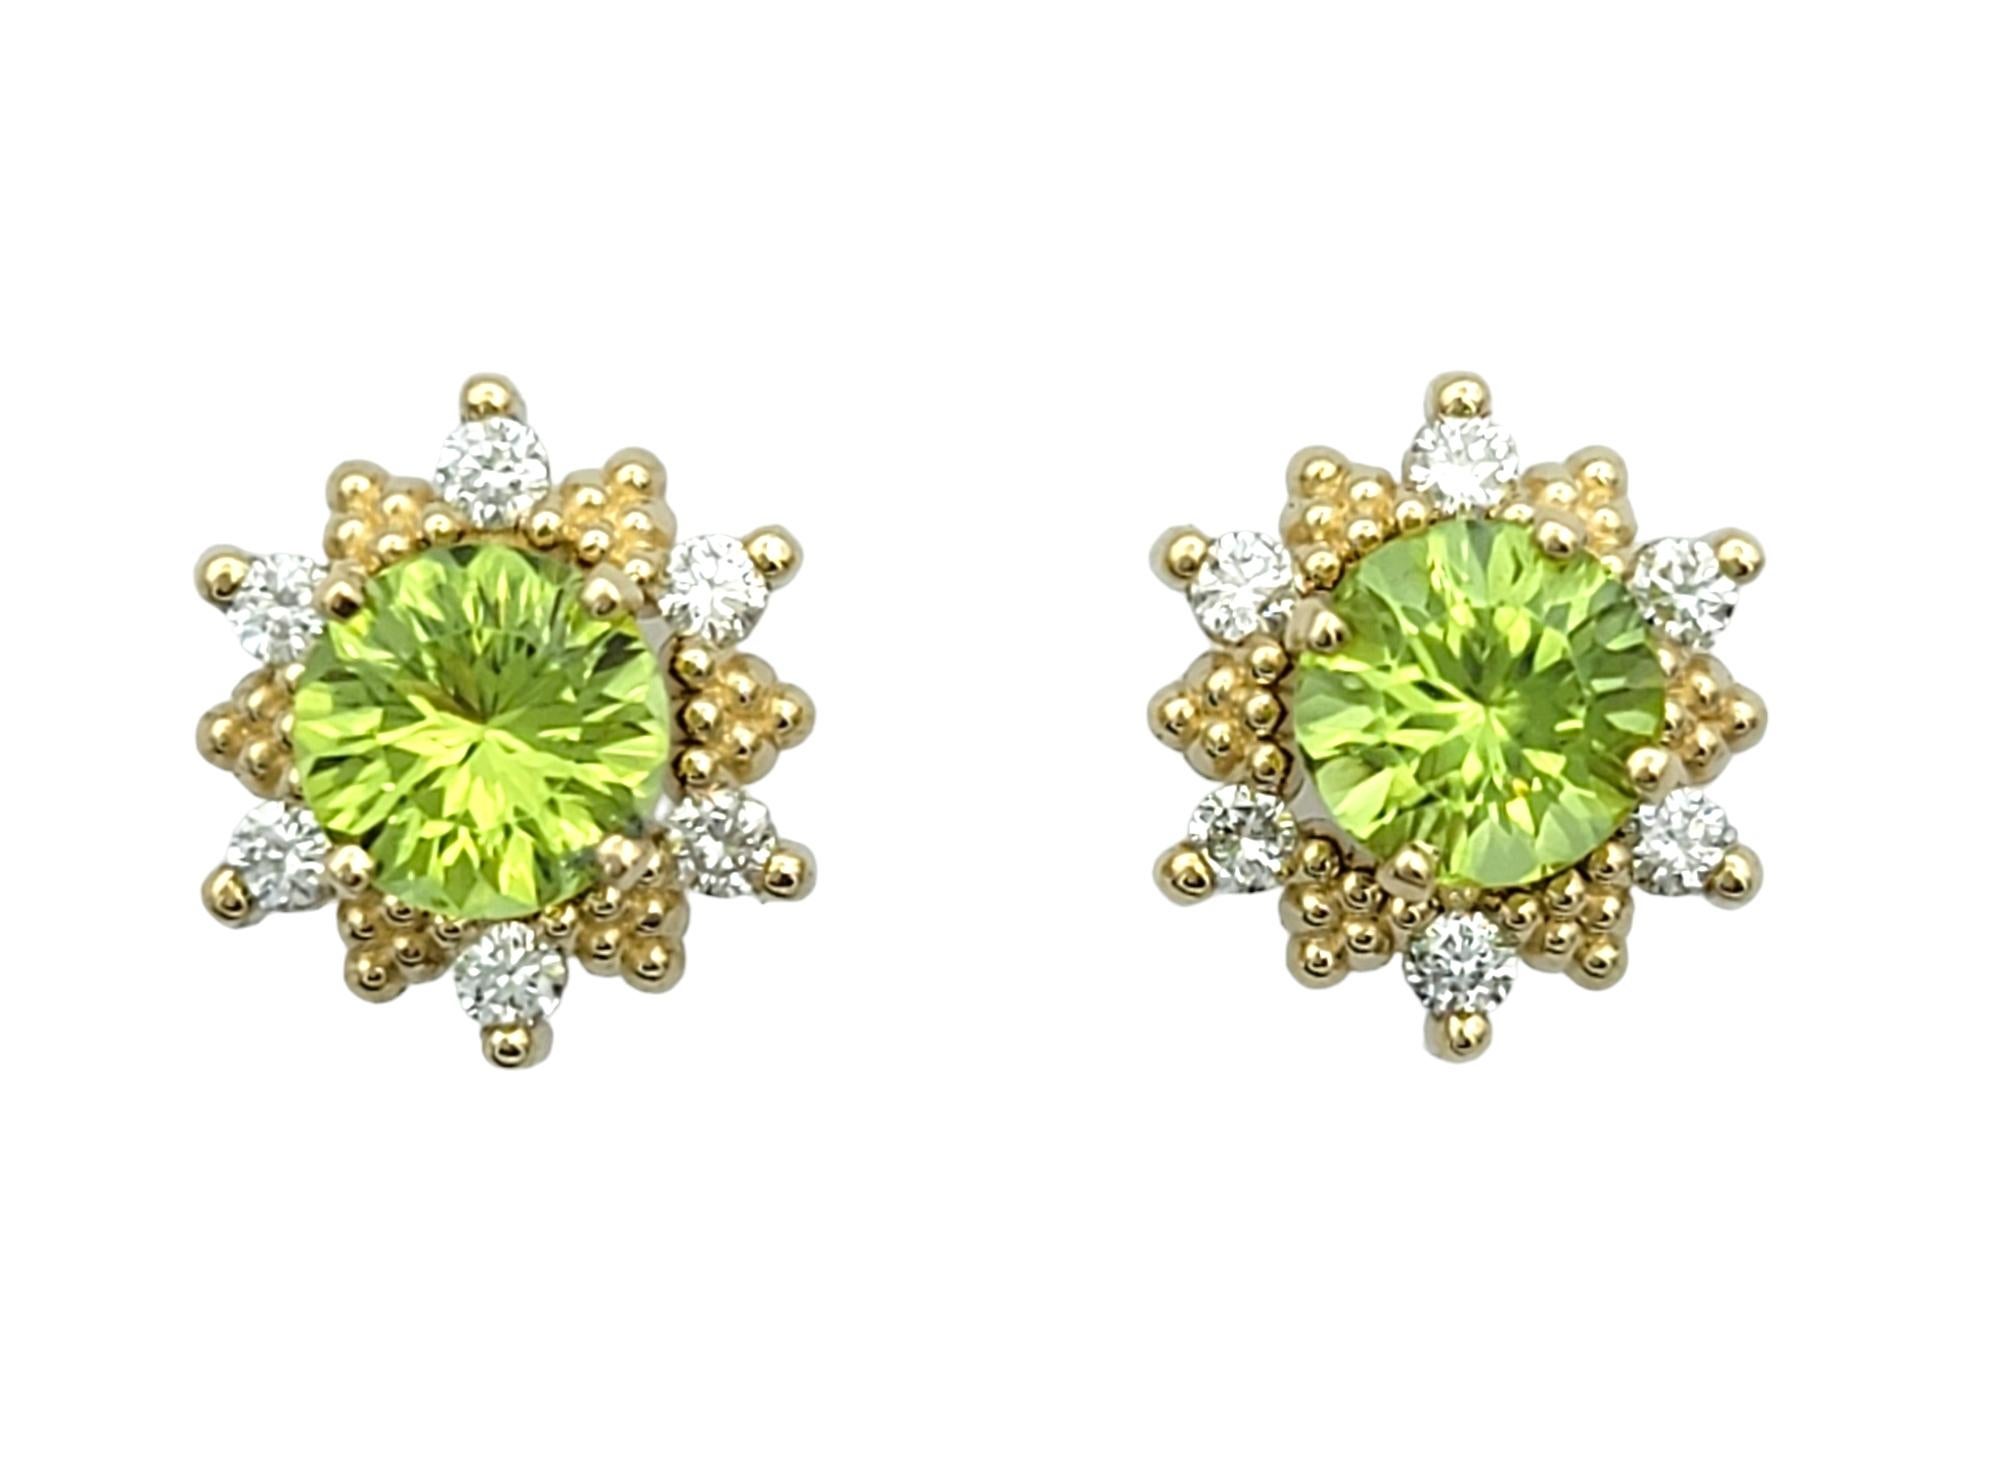 This gorgeous pair of peridot stud earrings exudes timeless elegance with a modern twist. Each stud features a lustrous peridot gemstone at its center, radiating with a captivating green hue reminiscent of fresh spring foliage. Surrounding the